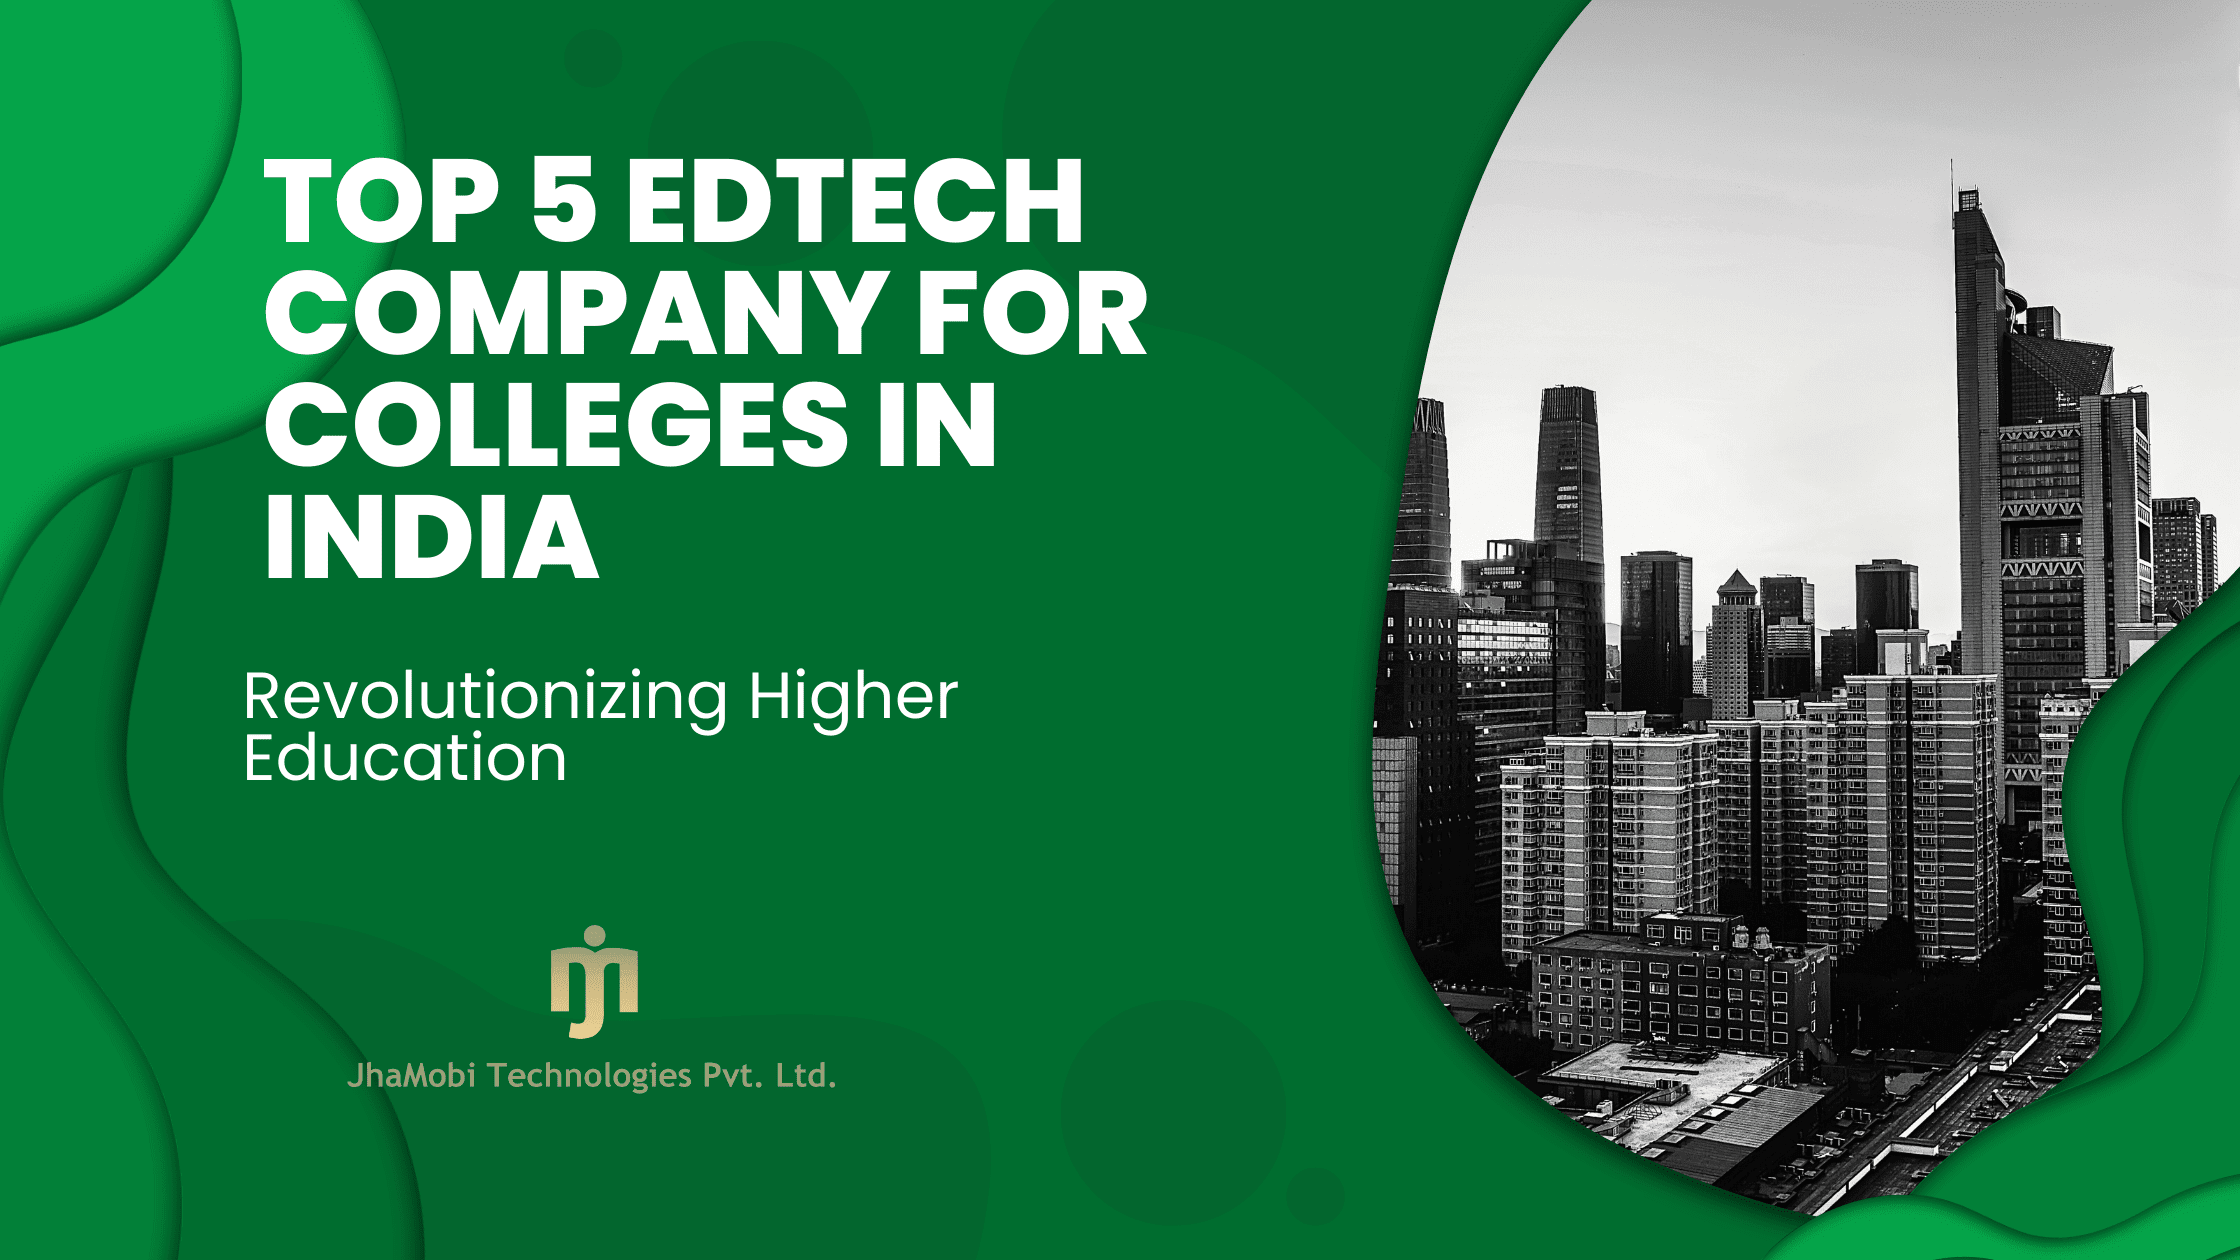 EdTech companies revolutionizing higher education in India